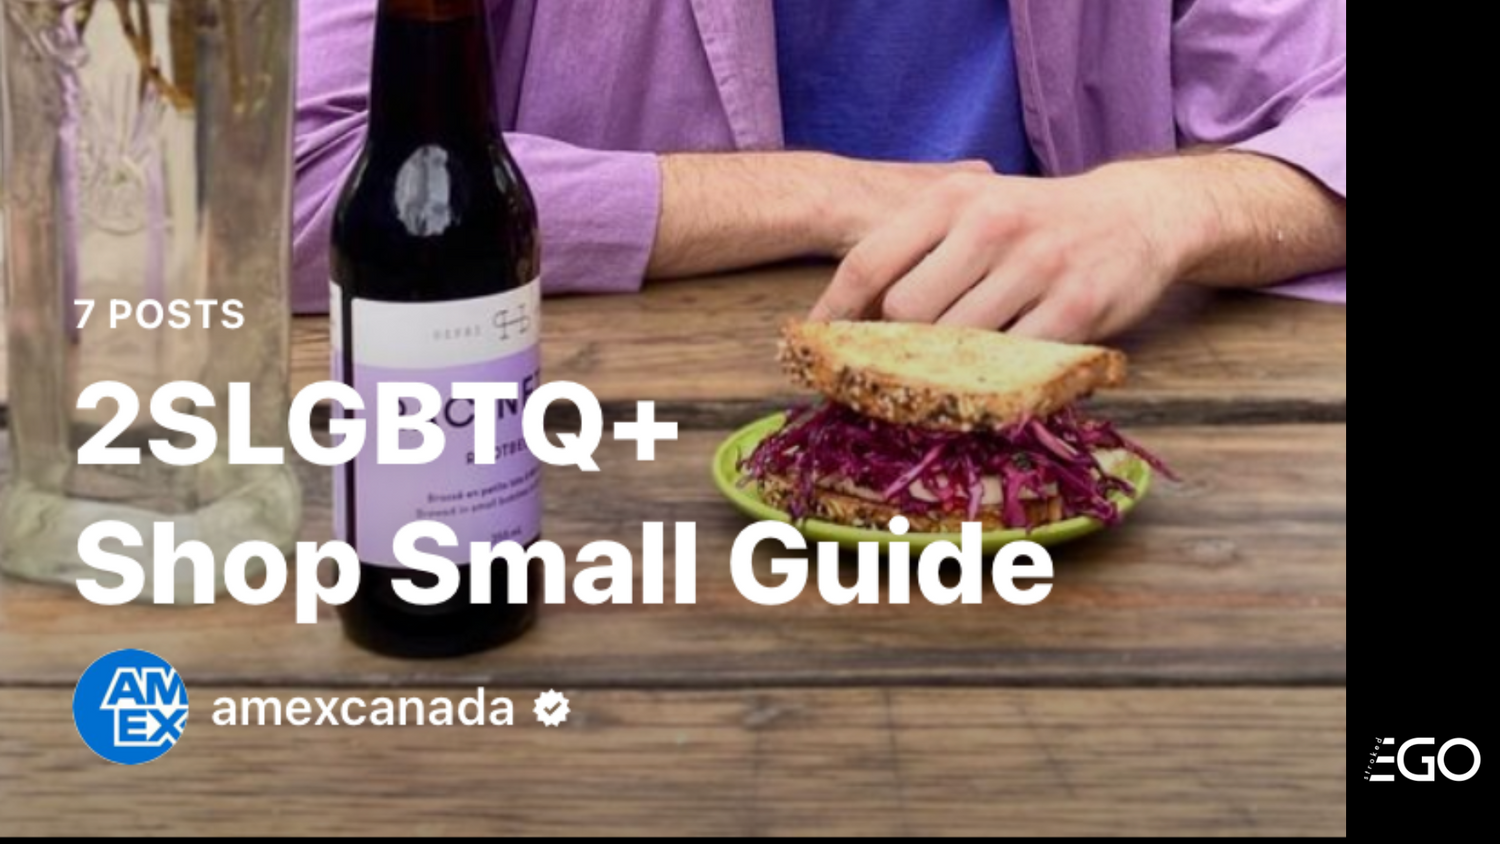 Stroked Ego Makes American Express' 2SLGBTQ+ Shop Small Guide